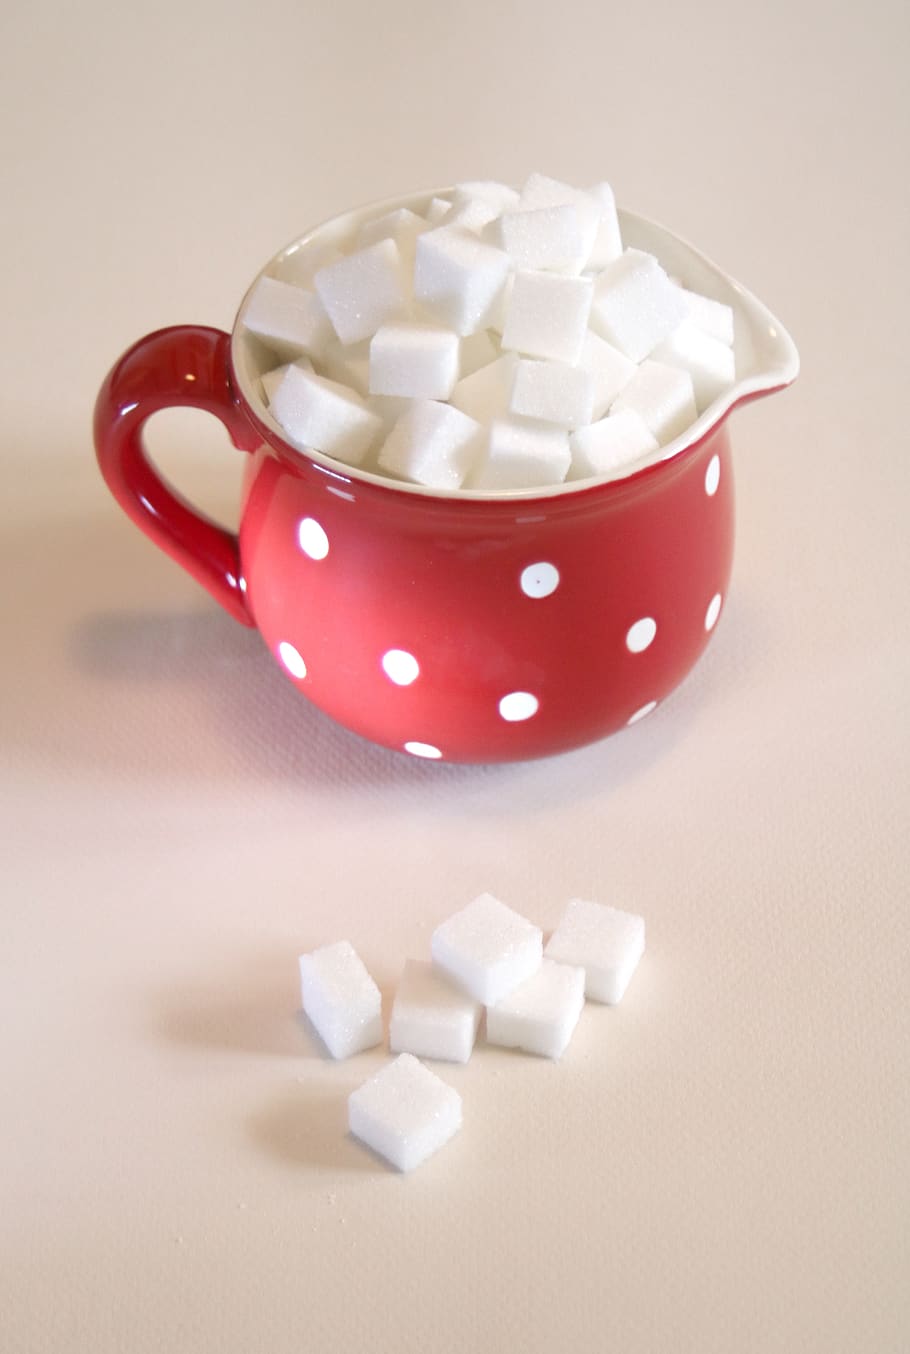 sugar, sugar cube, sweet, food, nutrition, eat, diet, large group of objects, indoors, dose